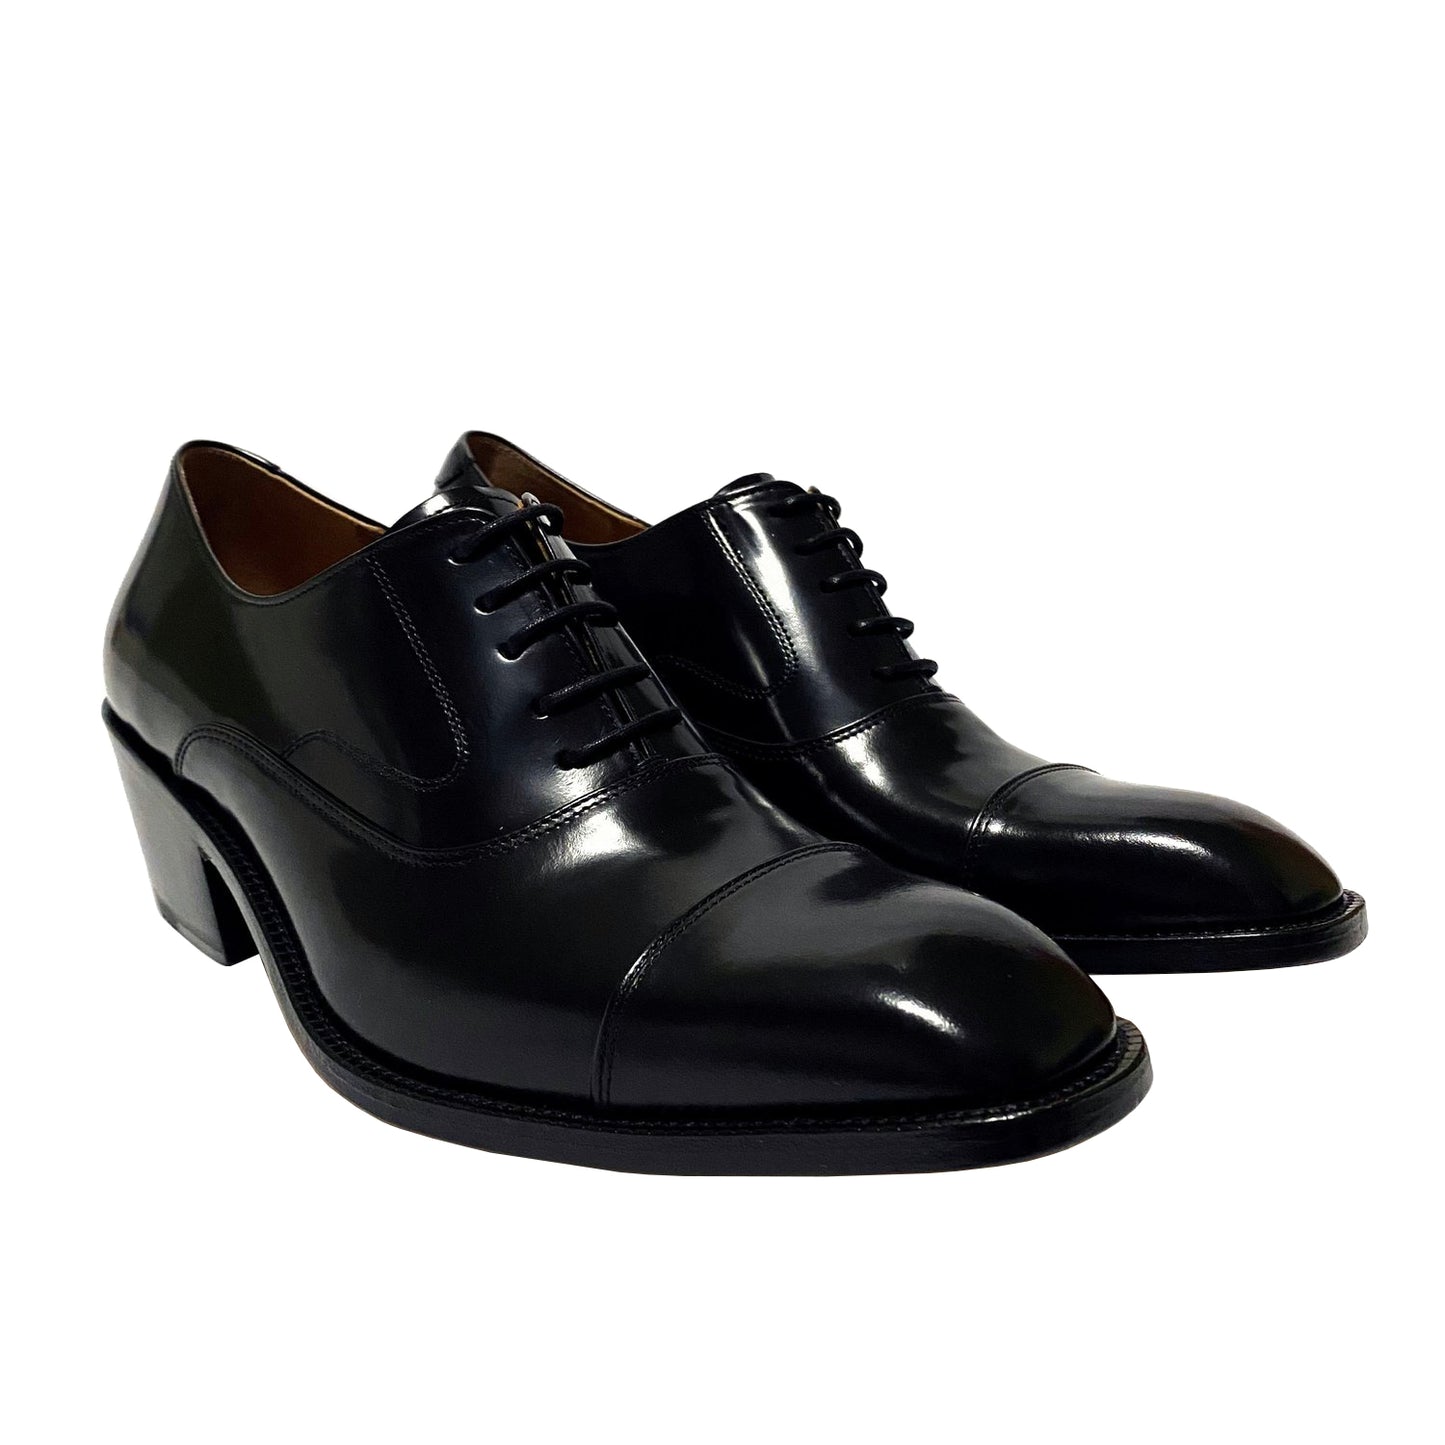 Eric 55mm Oxford in Brushed Calf Leather